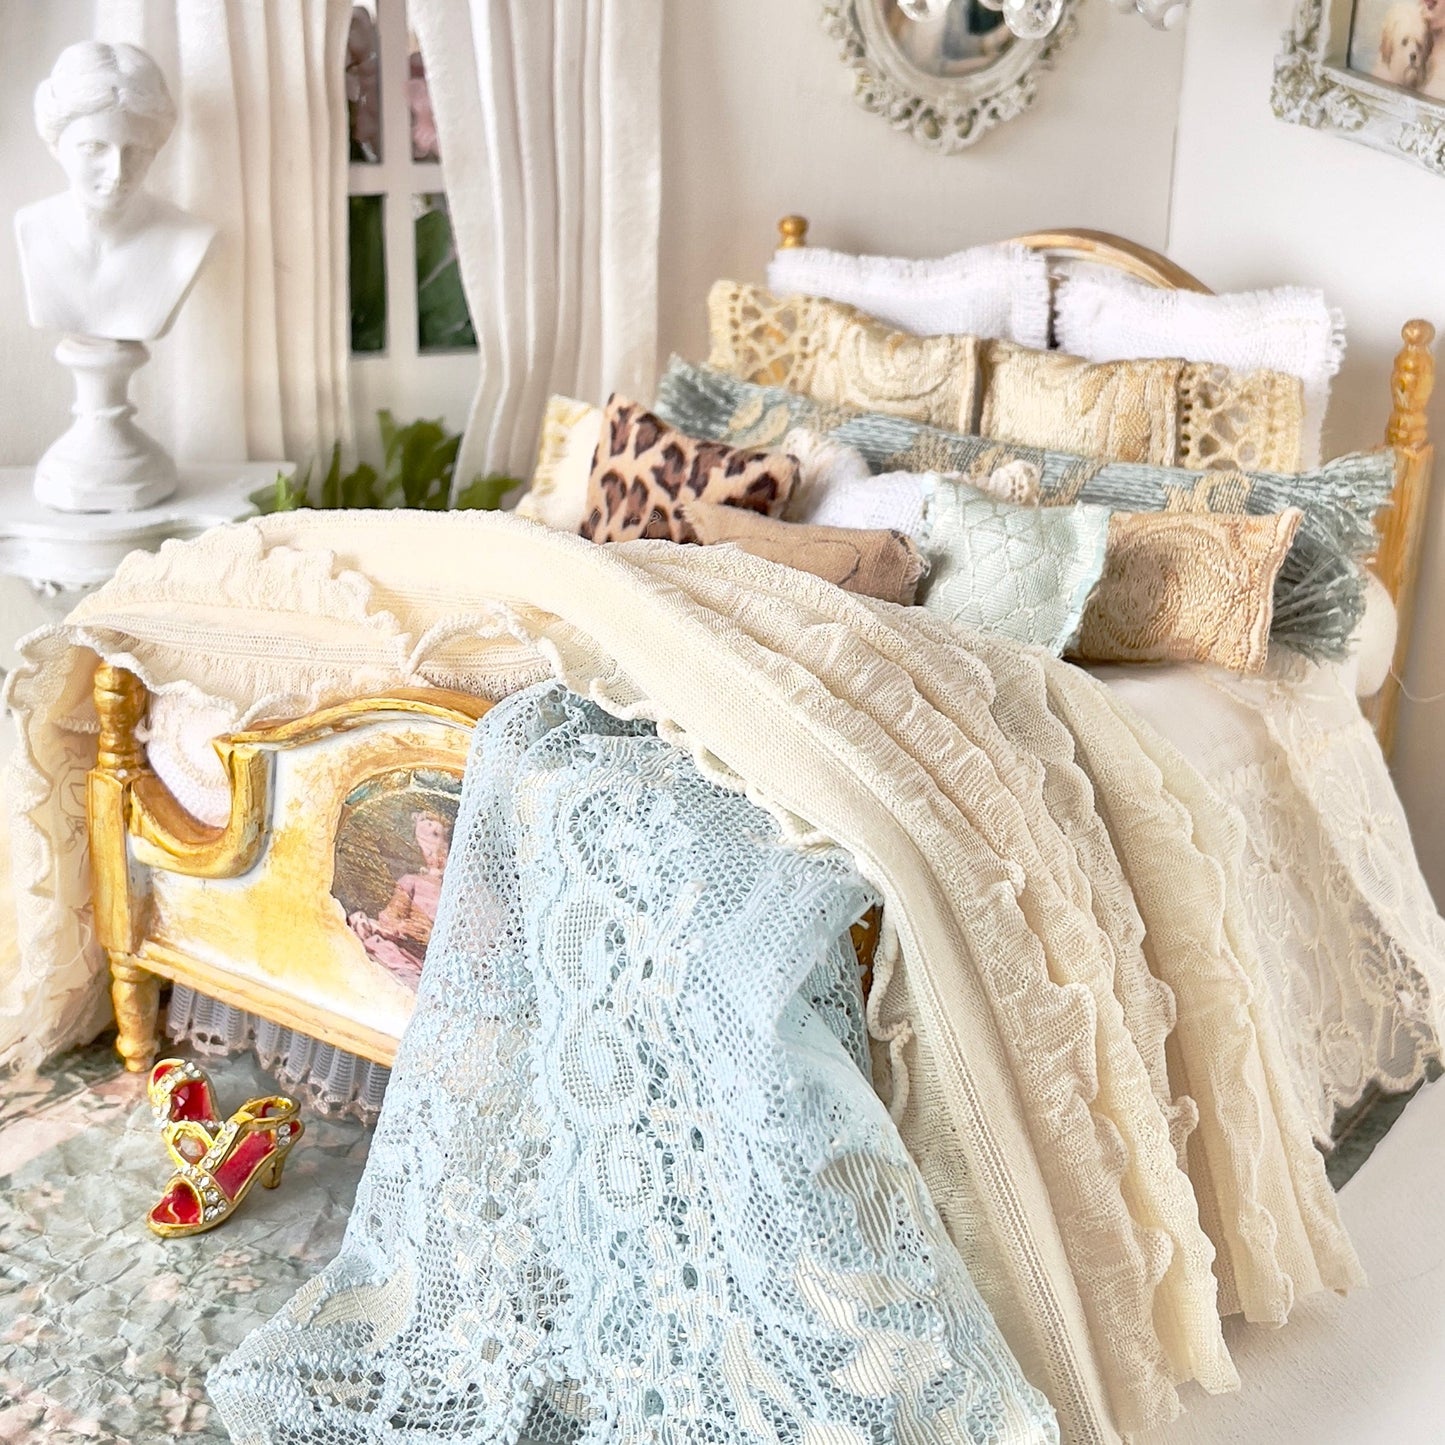 Chantallena Doll House dressed bed Chloe | Decoupage Paris Theme with Linen and Lace Bedding